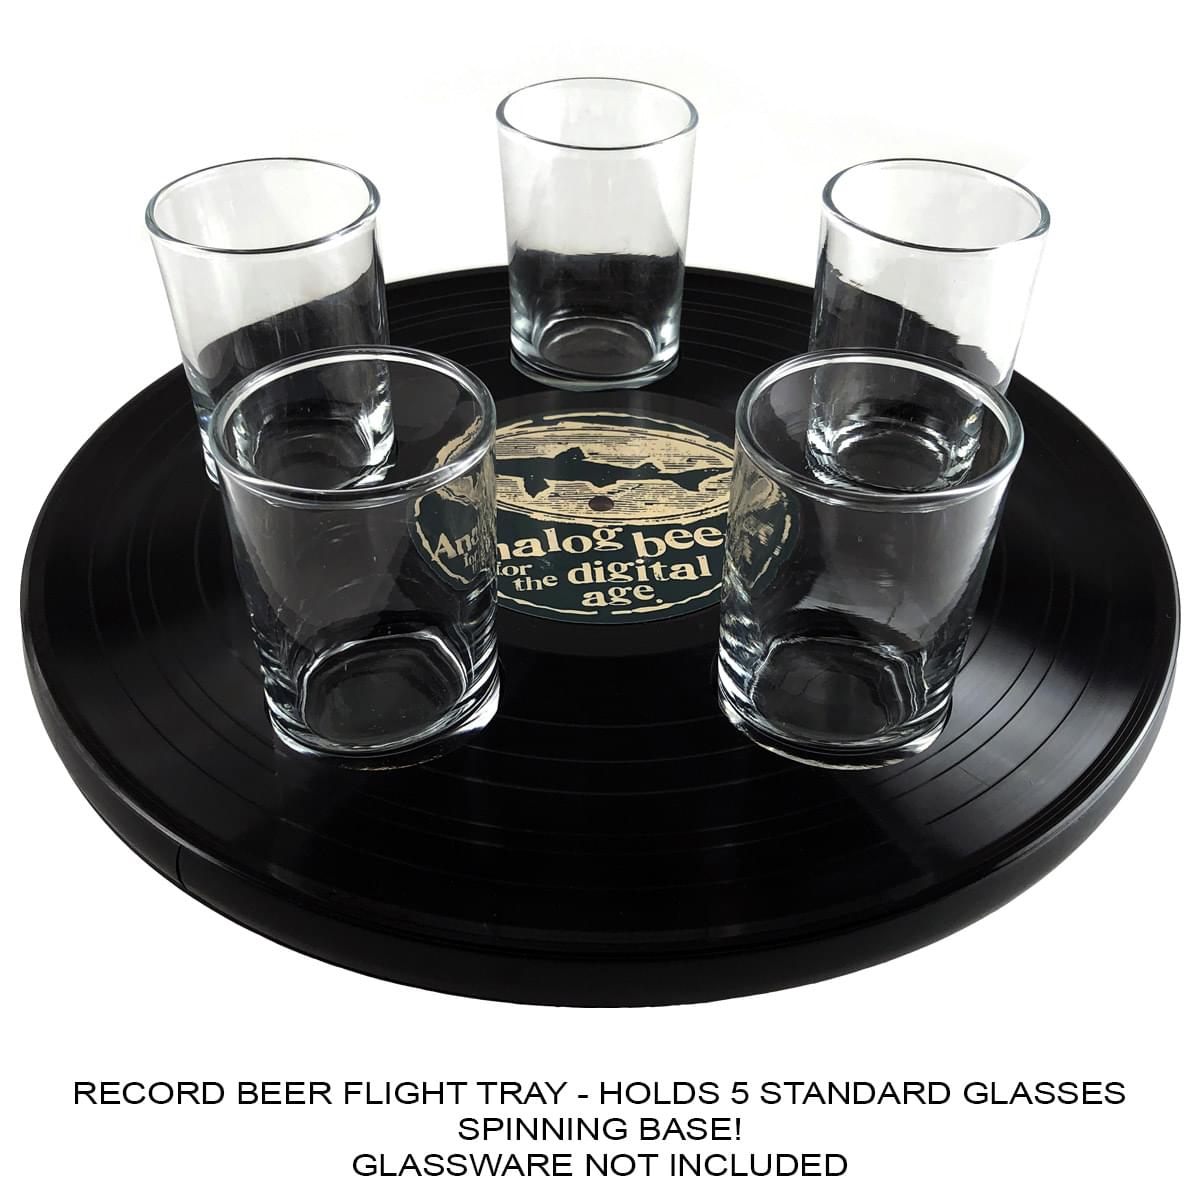 Recycled Vinyl Record Flight Tray W/ Spinning Base (Glassware Not Included)